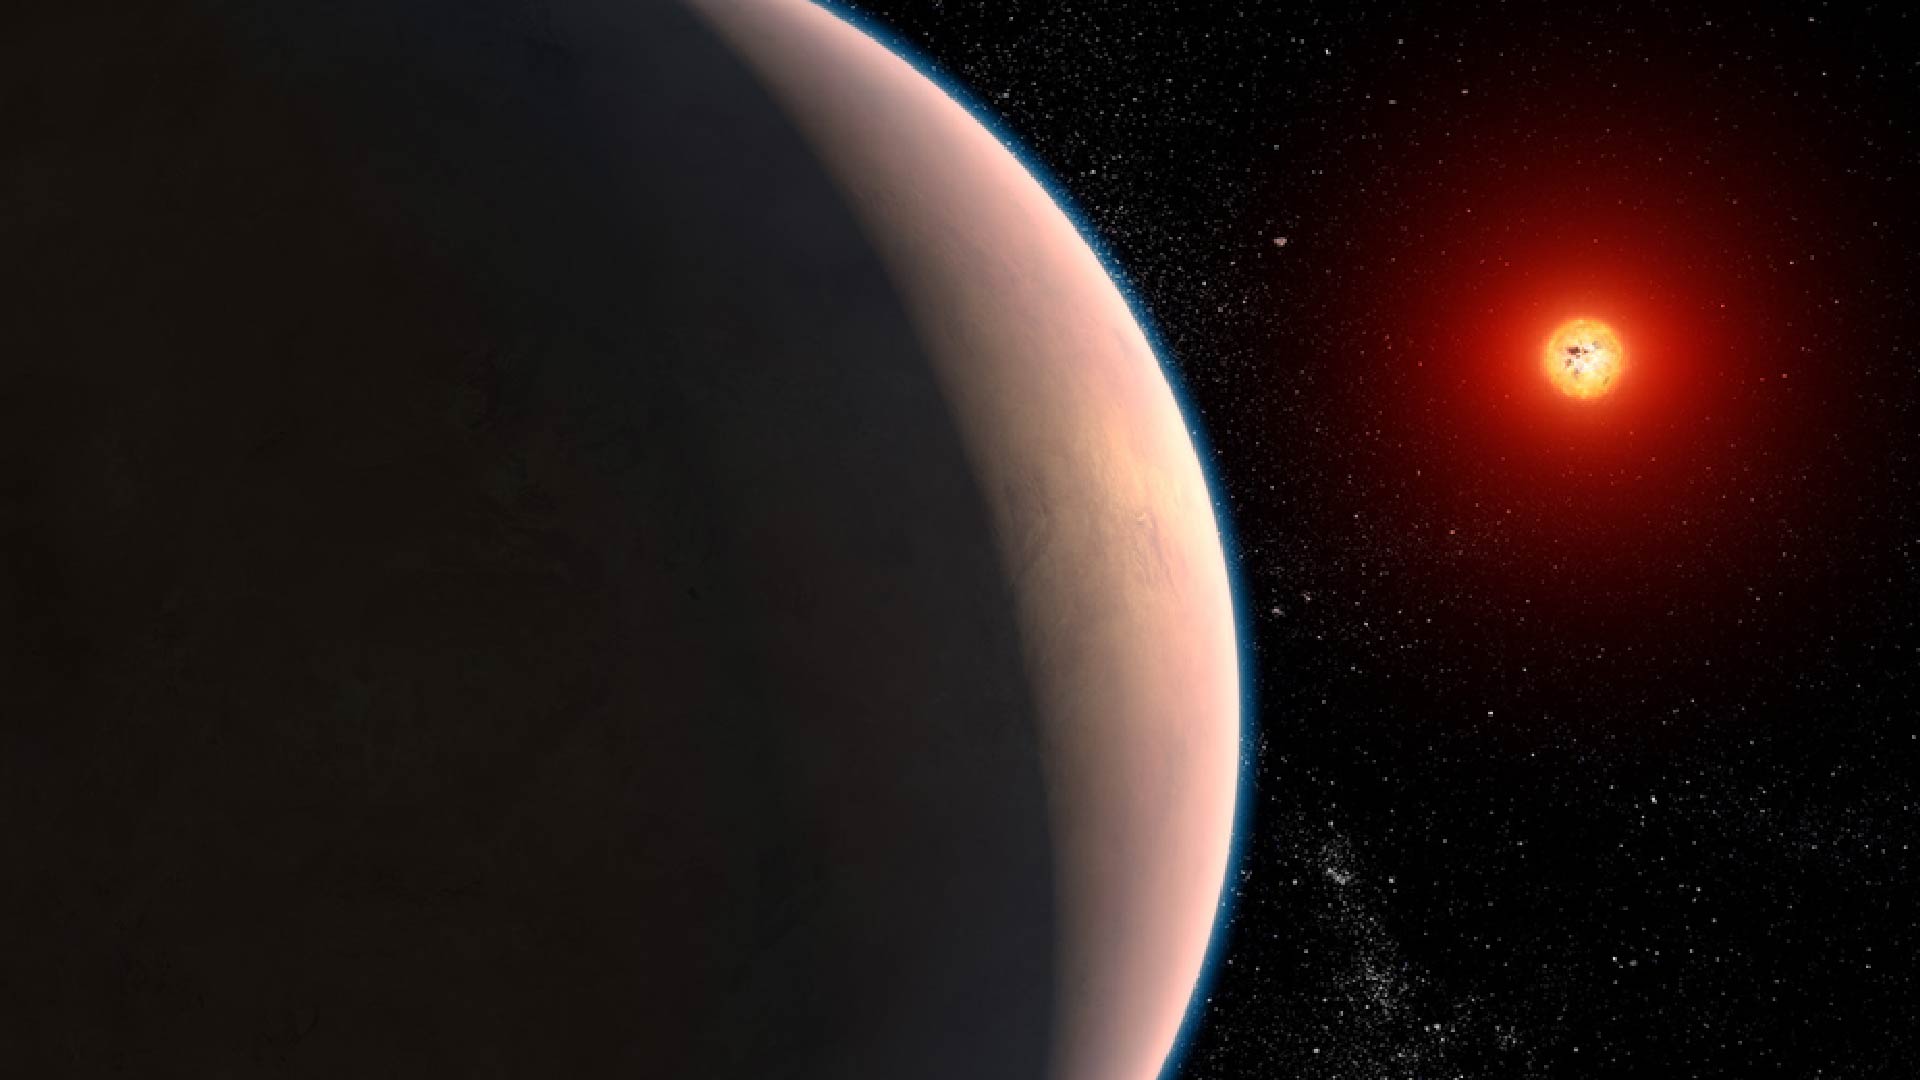 This artist concept represents the rocky exoplanet GJ 486 b, which orbits a red dwarf star.